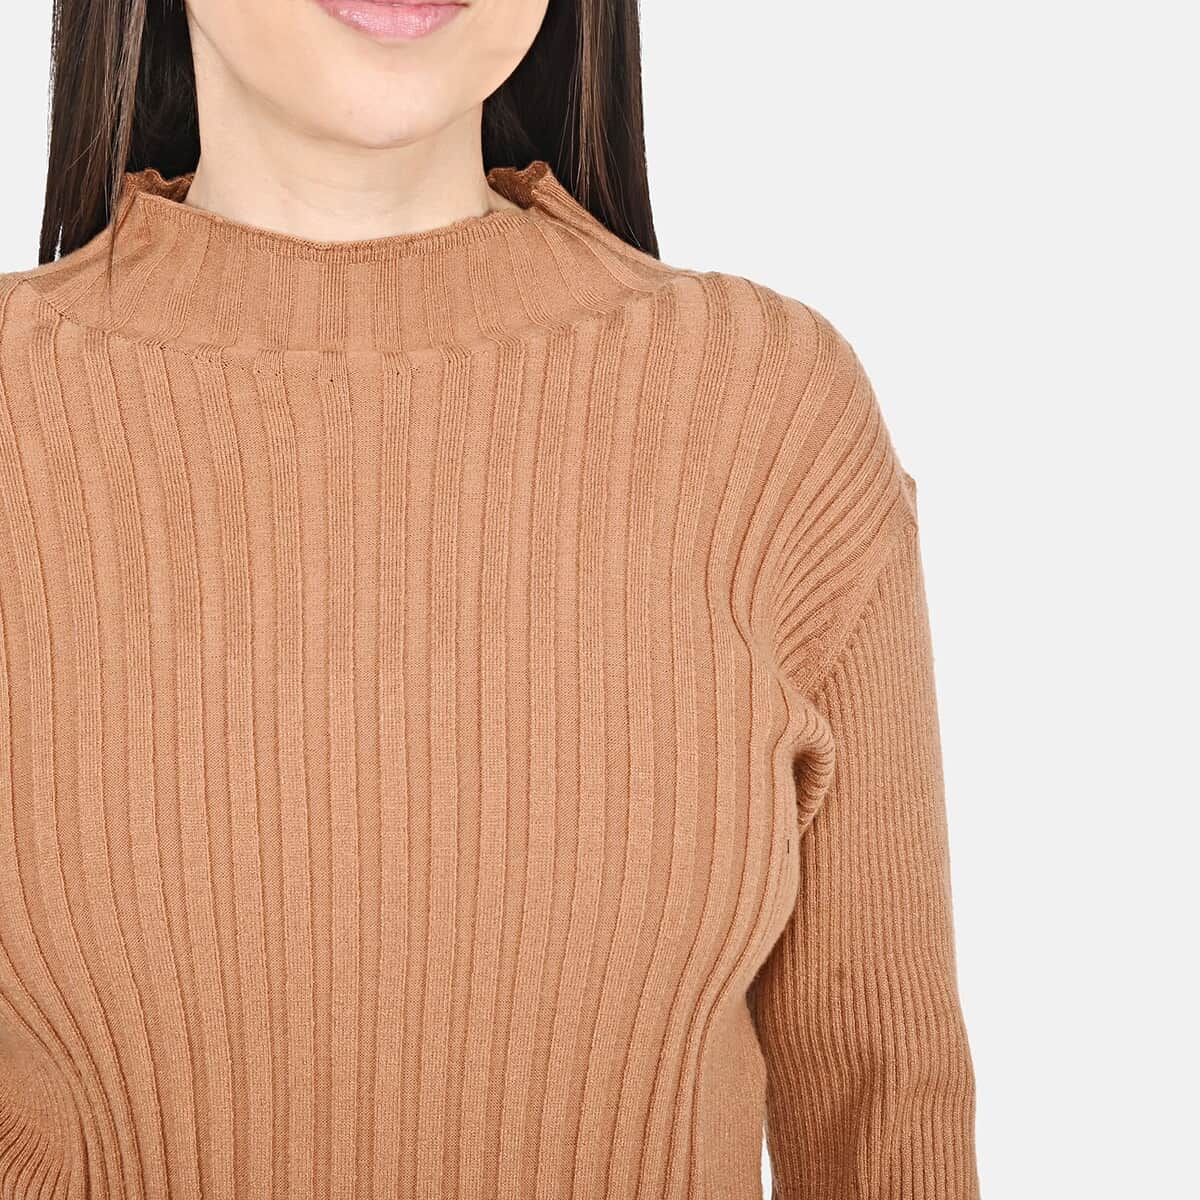 Tamsy Brown Knit Turtleneck - XS image number 4